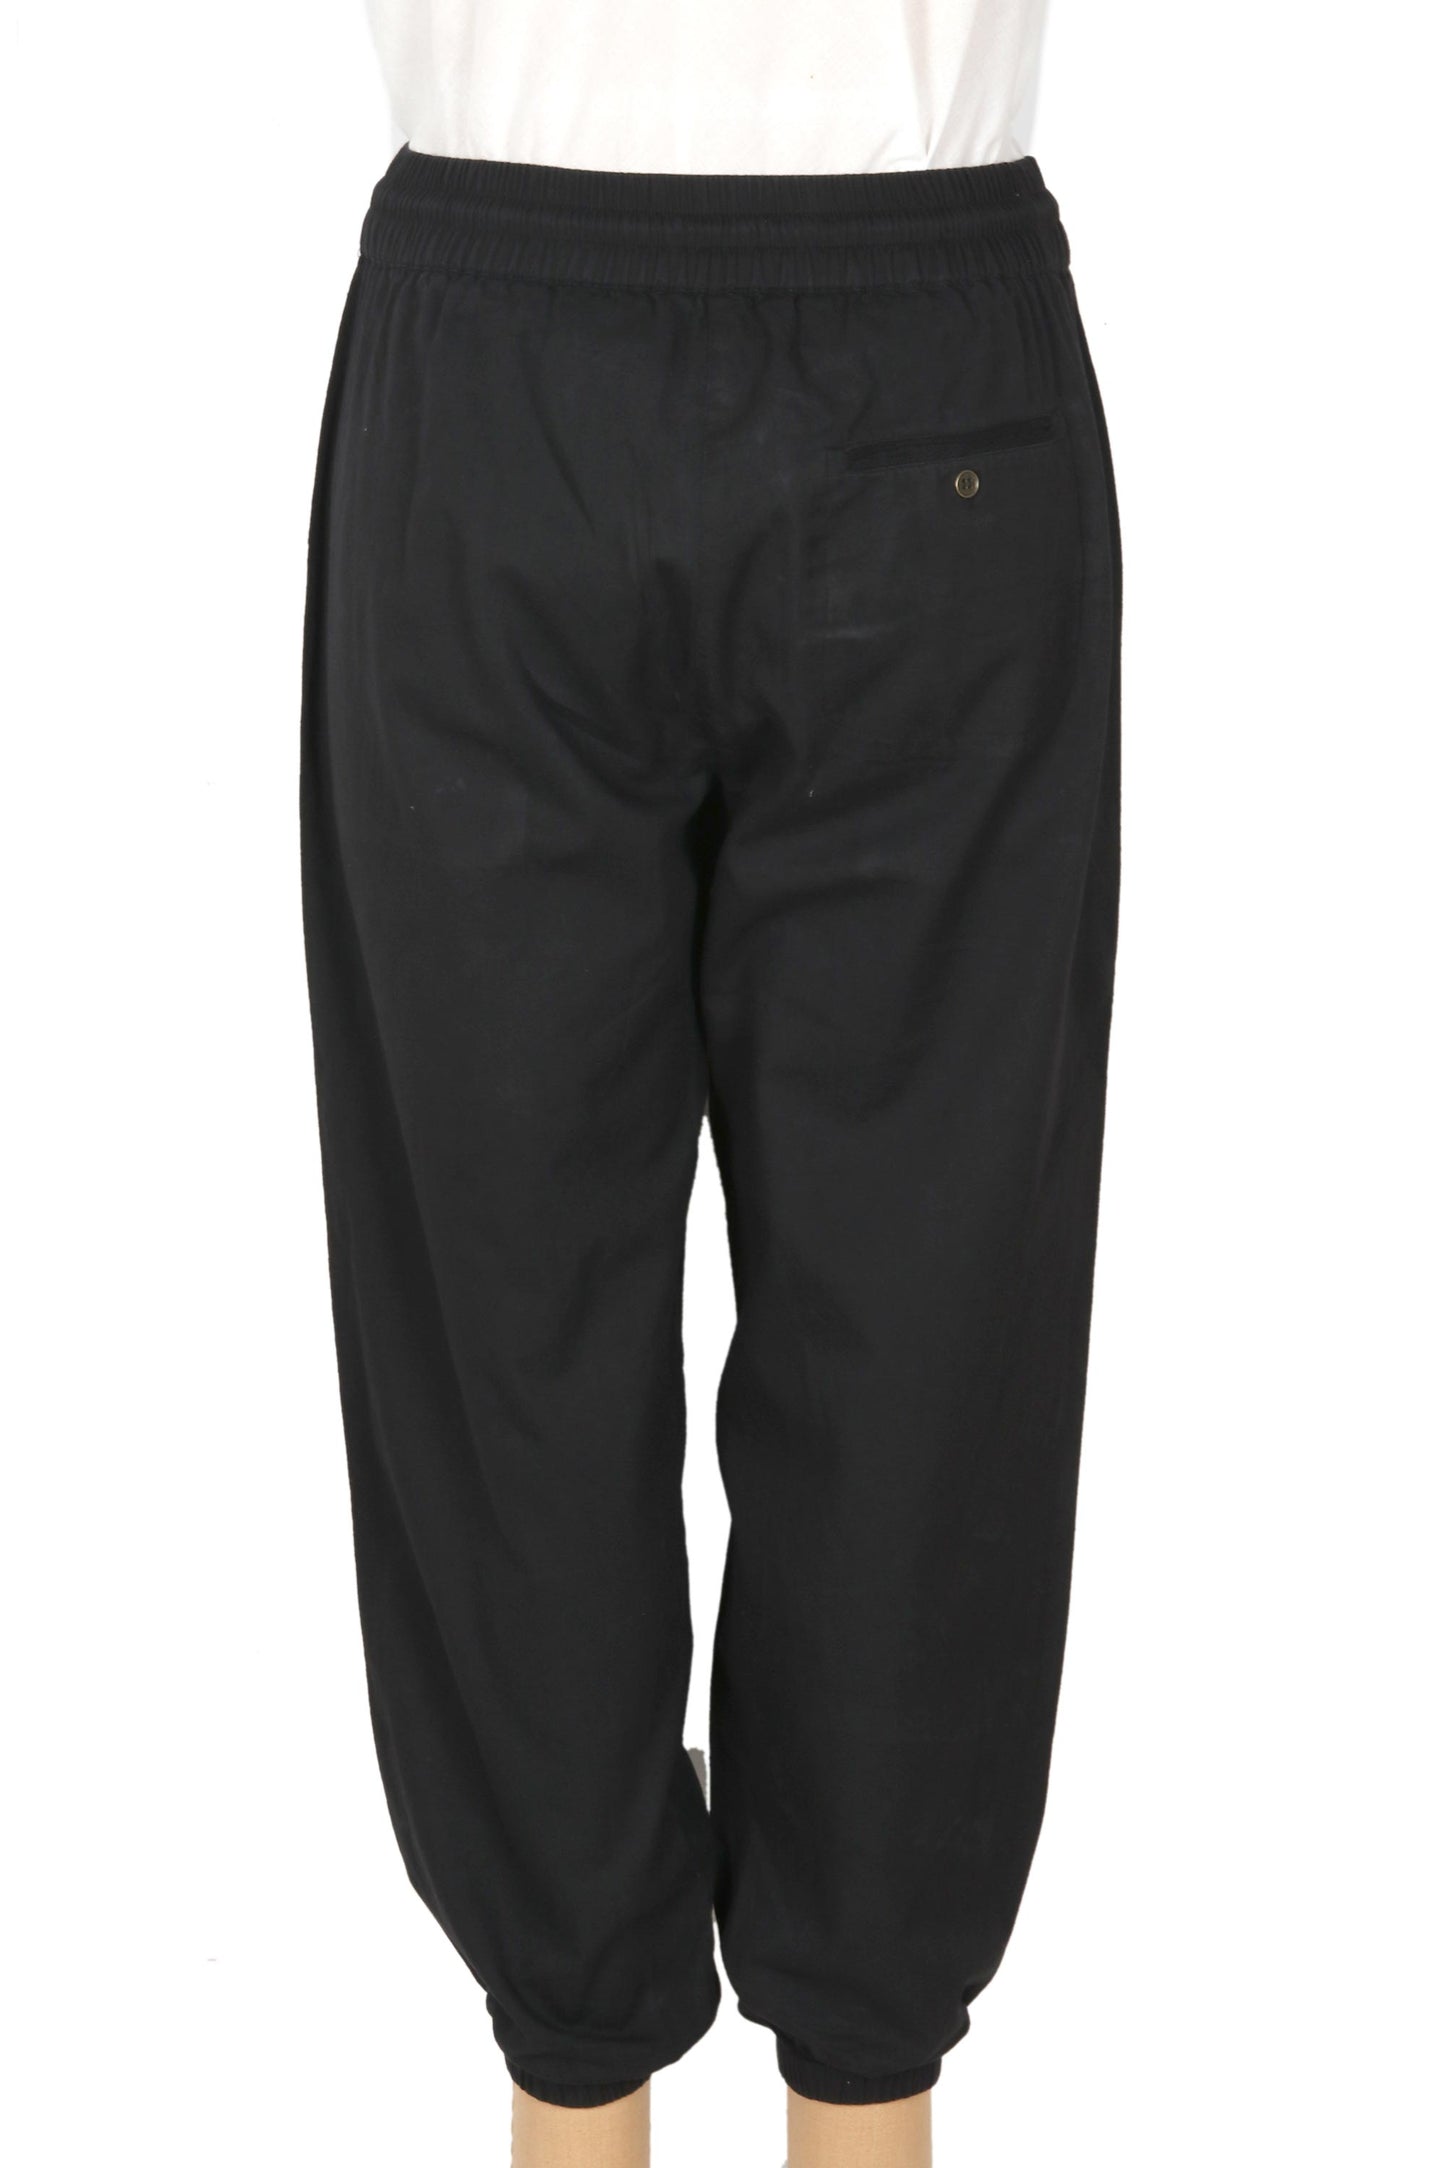 Casual Midnight Black Enzyme Wash Cotton Twill Joggers with Drawstring Waist